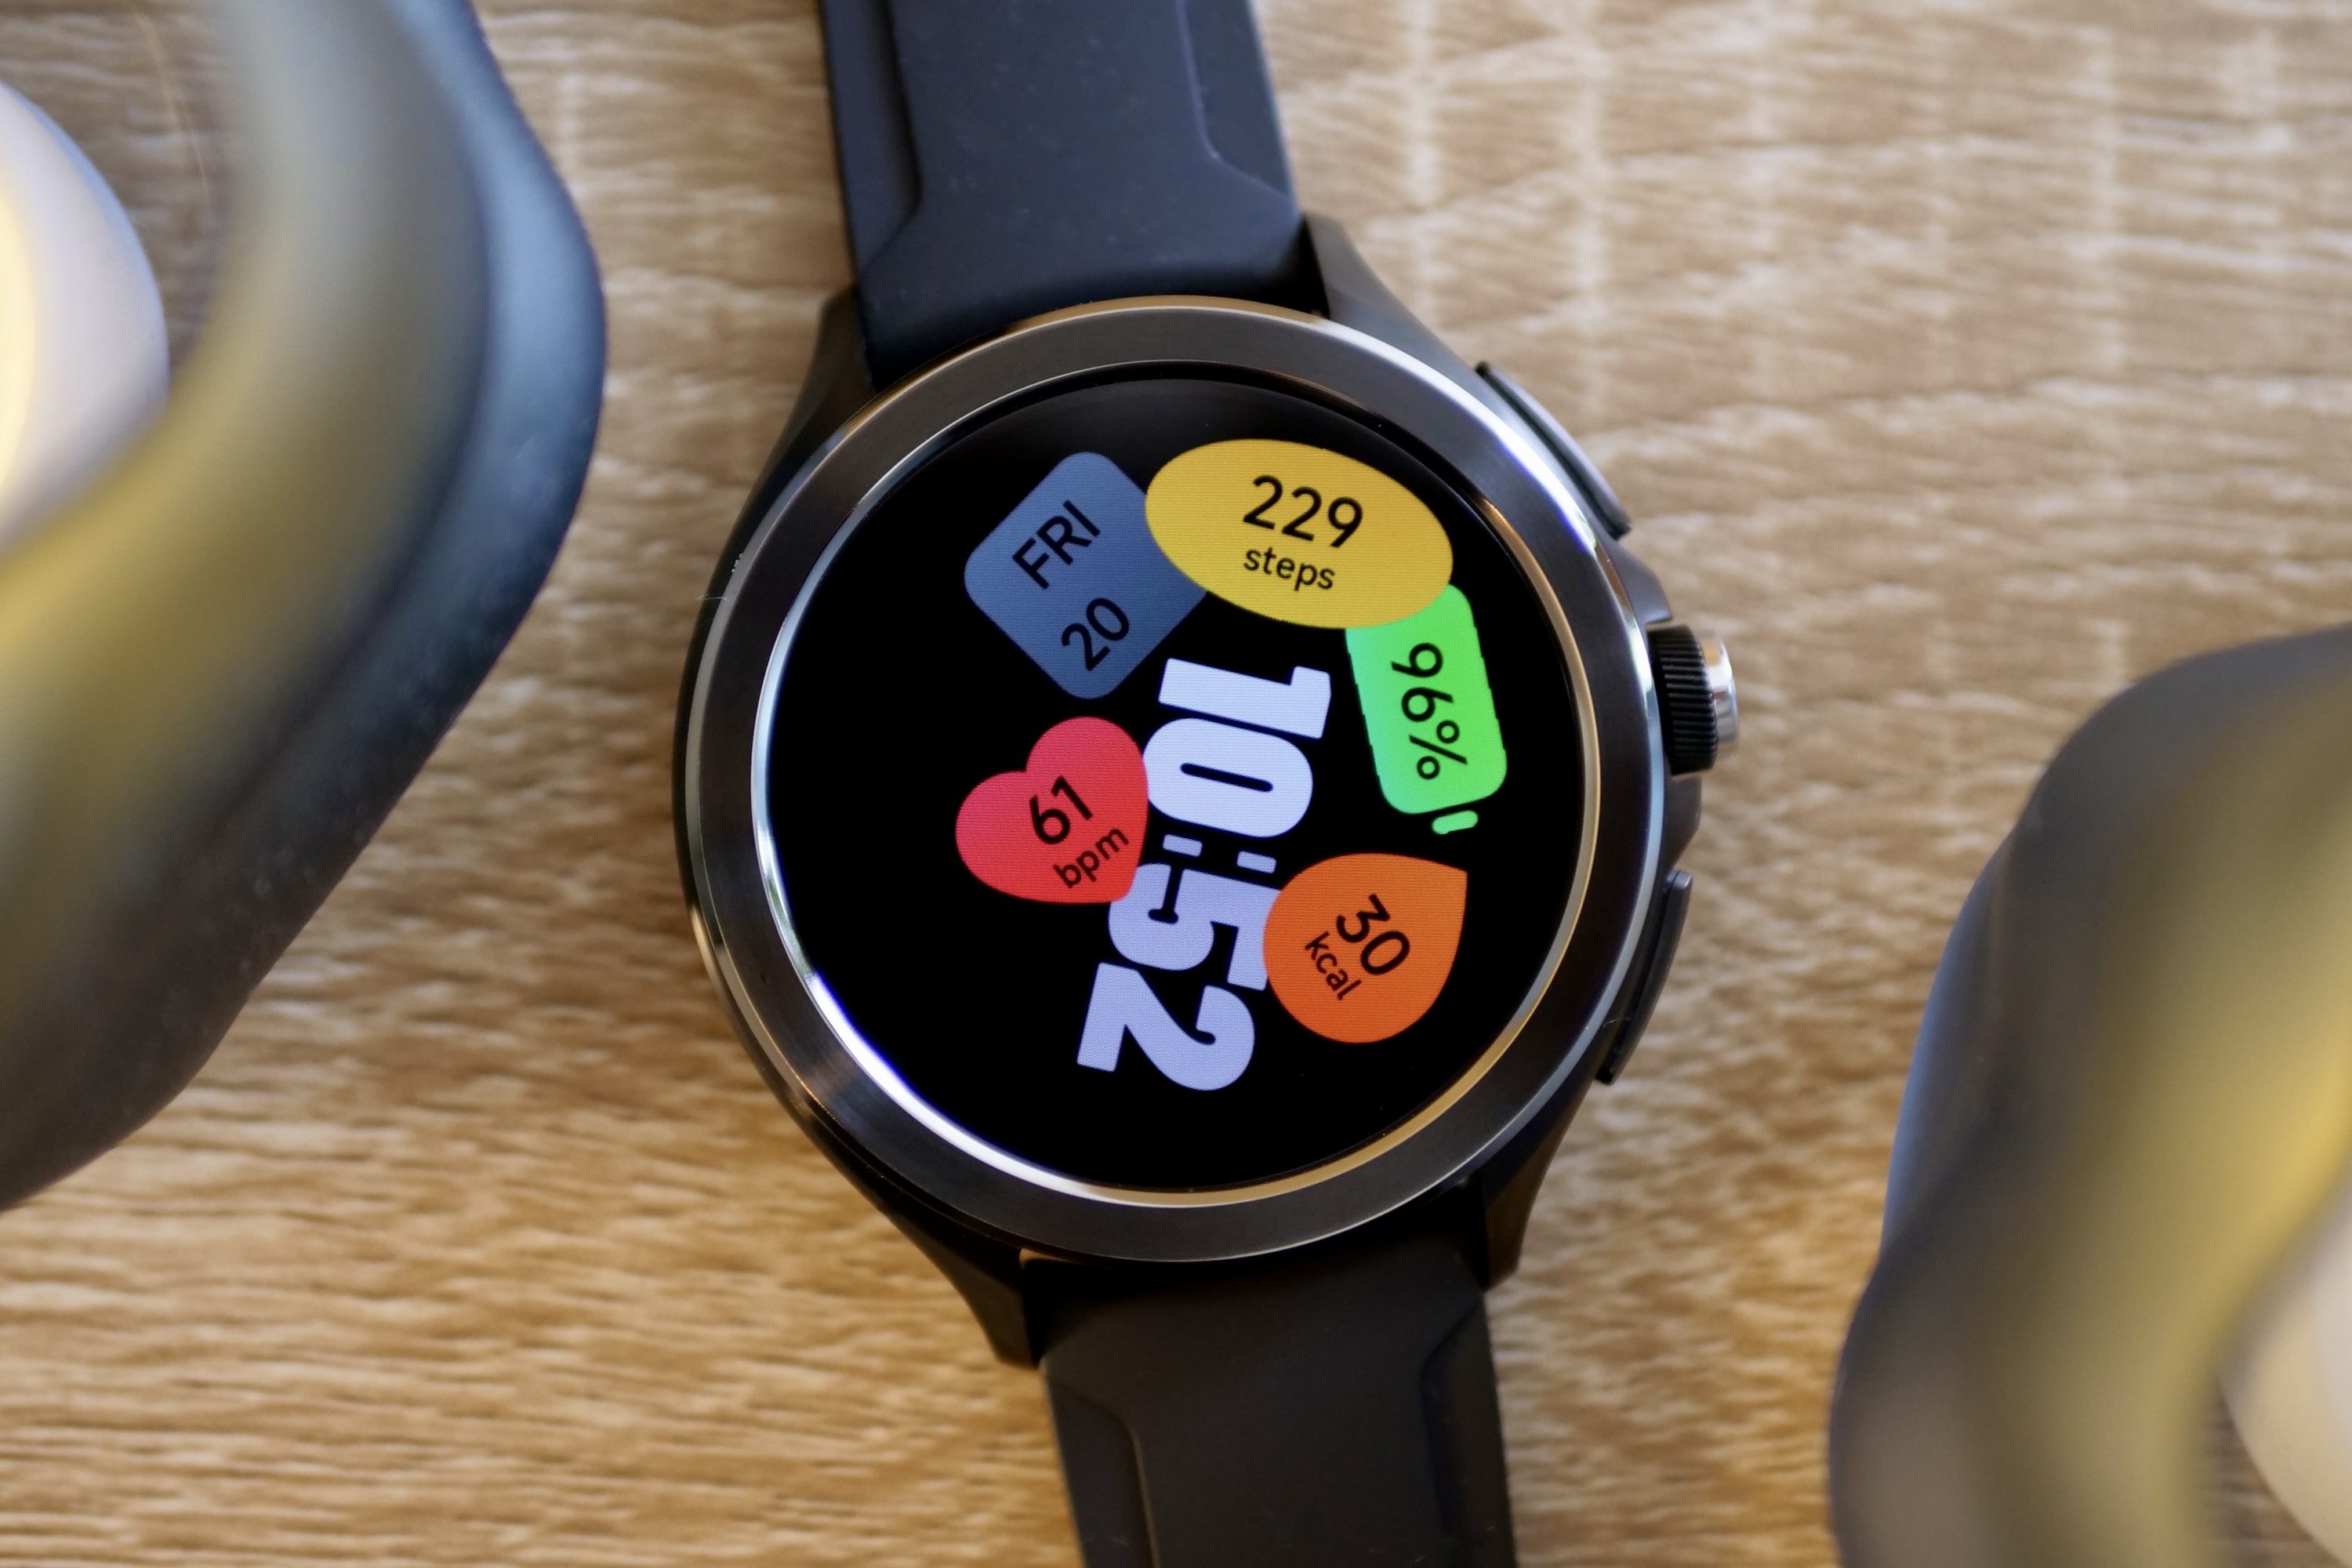 Xiaomi Watch 2 Pro launched with Wear OS, AMOLED display, 4G LTE -  Gizmochina